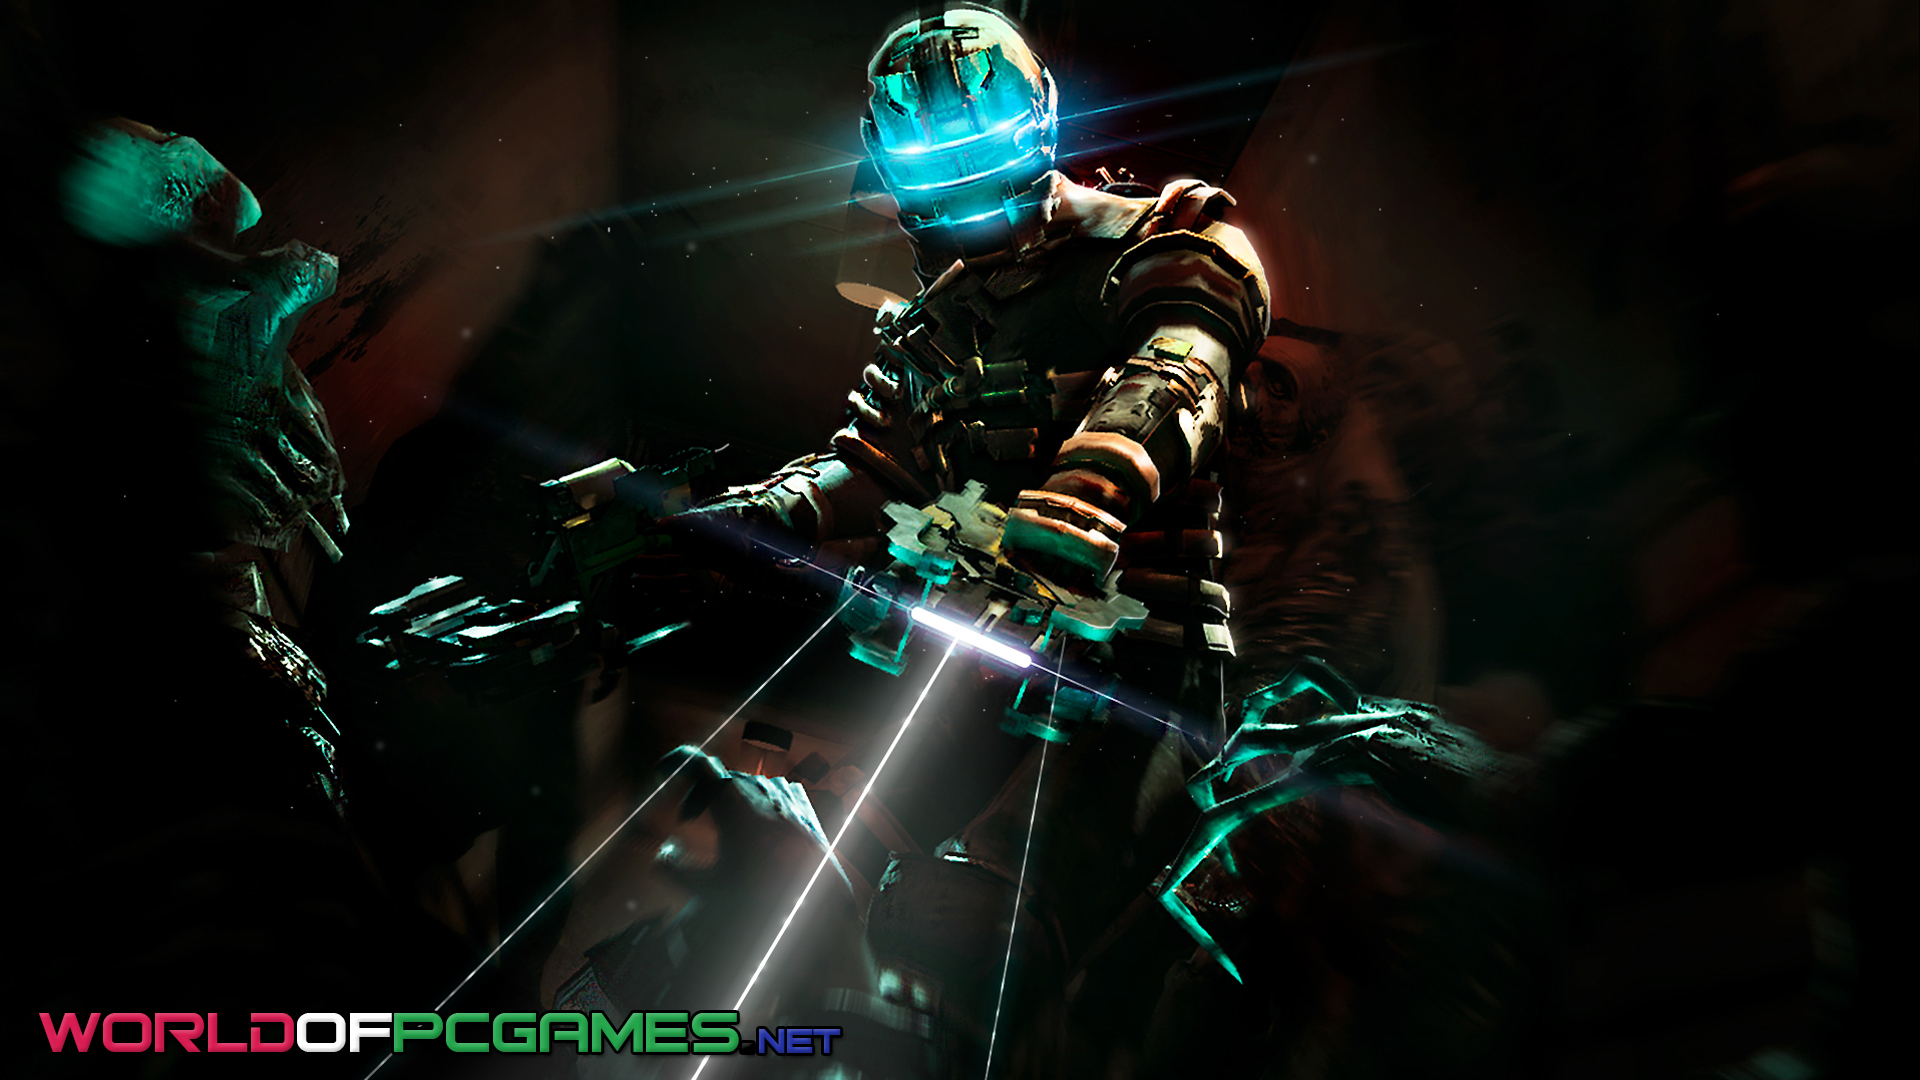 dead space 1 Free Download By worldof-pcgames.net